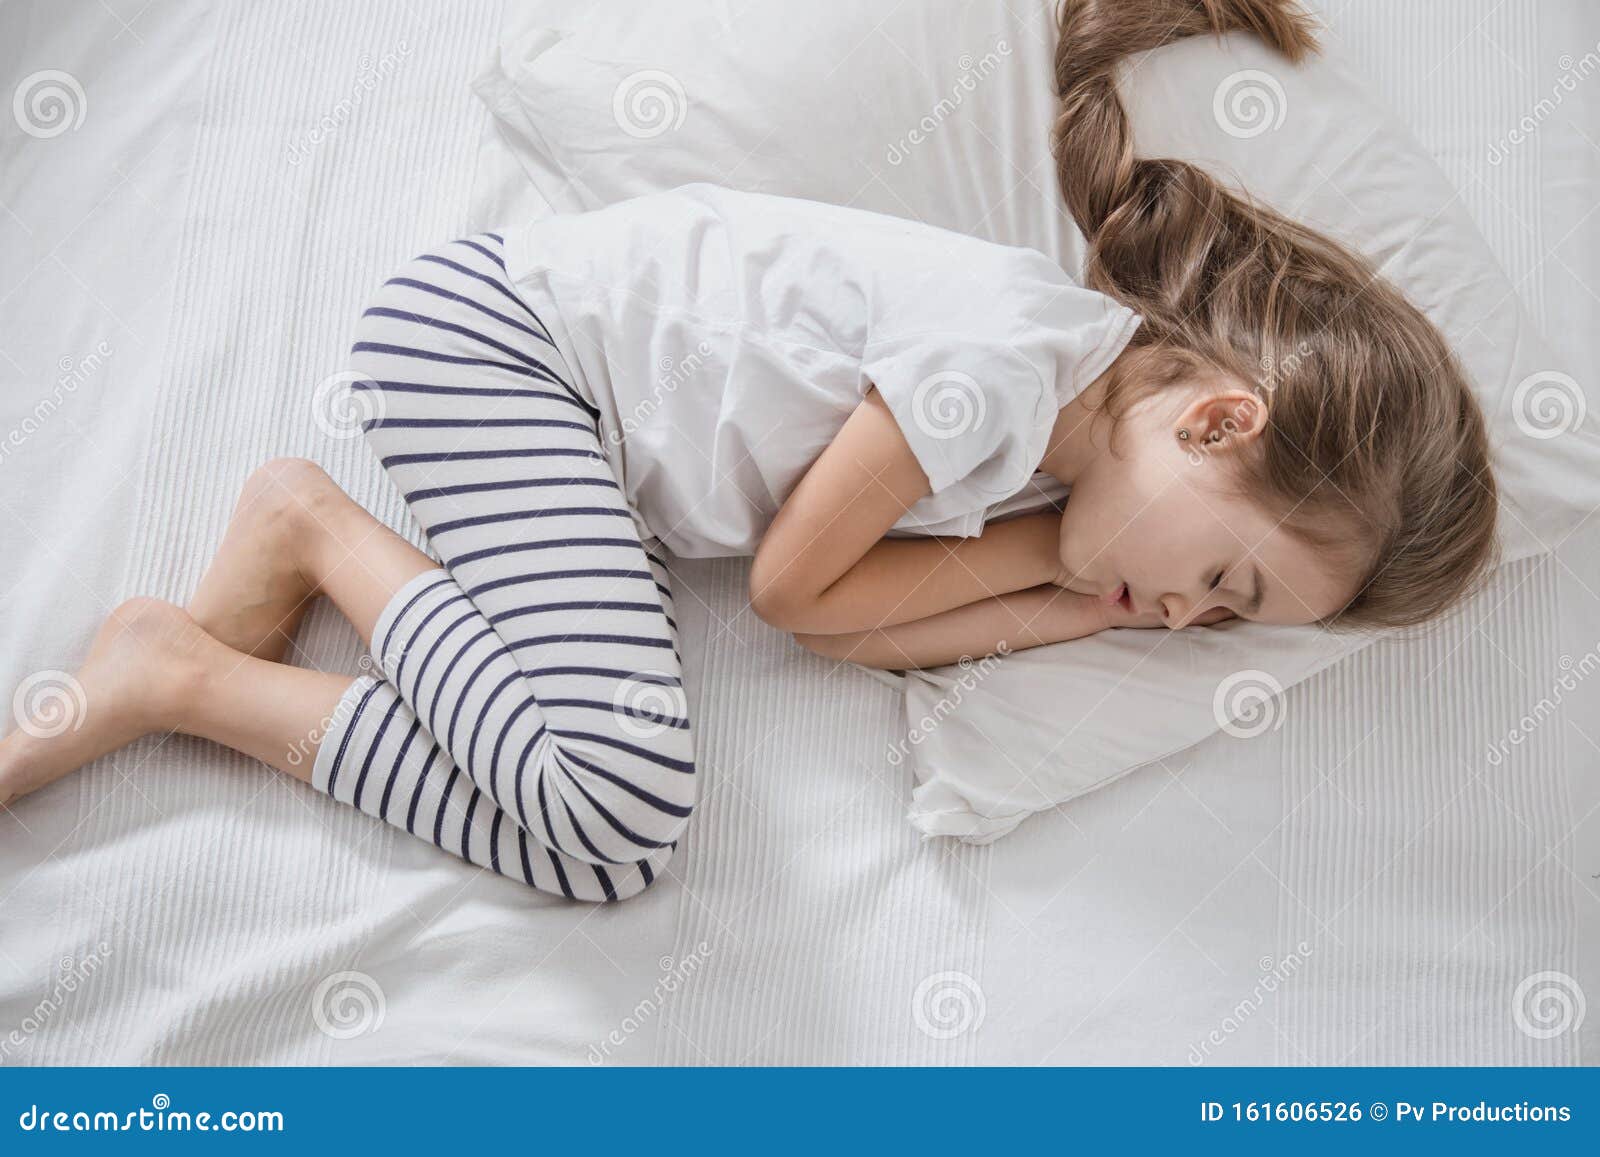 Cute Little Girl with Long Hair Sleeping in Bed Stock Photo - Image of  child, concept: 161606526